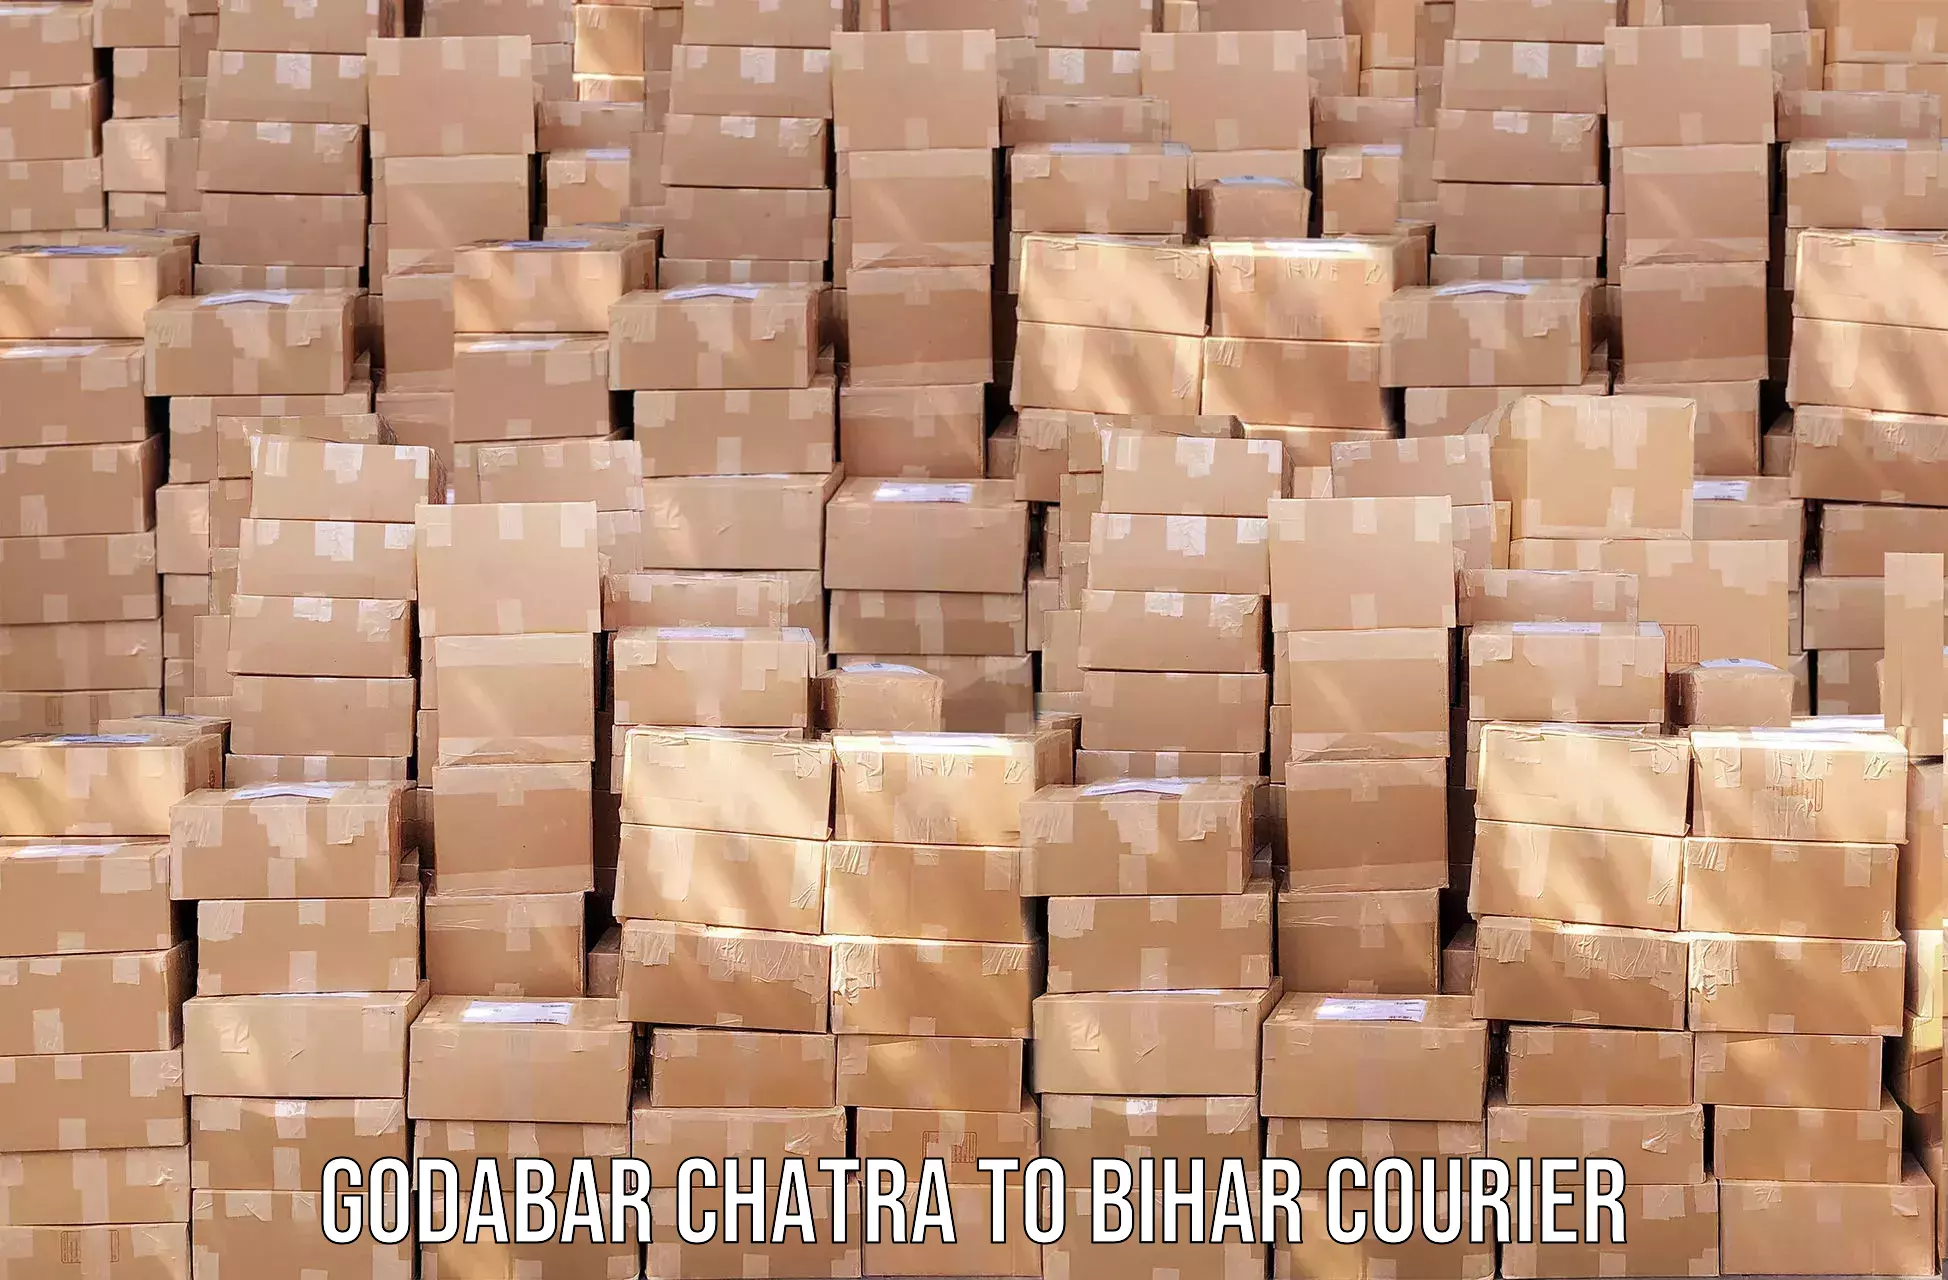 Personal courier services Godabar Chatra to Bihar